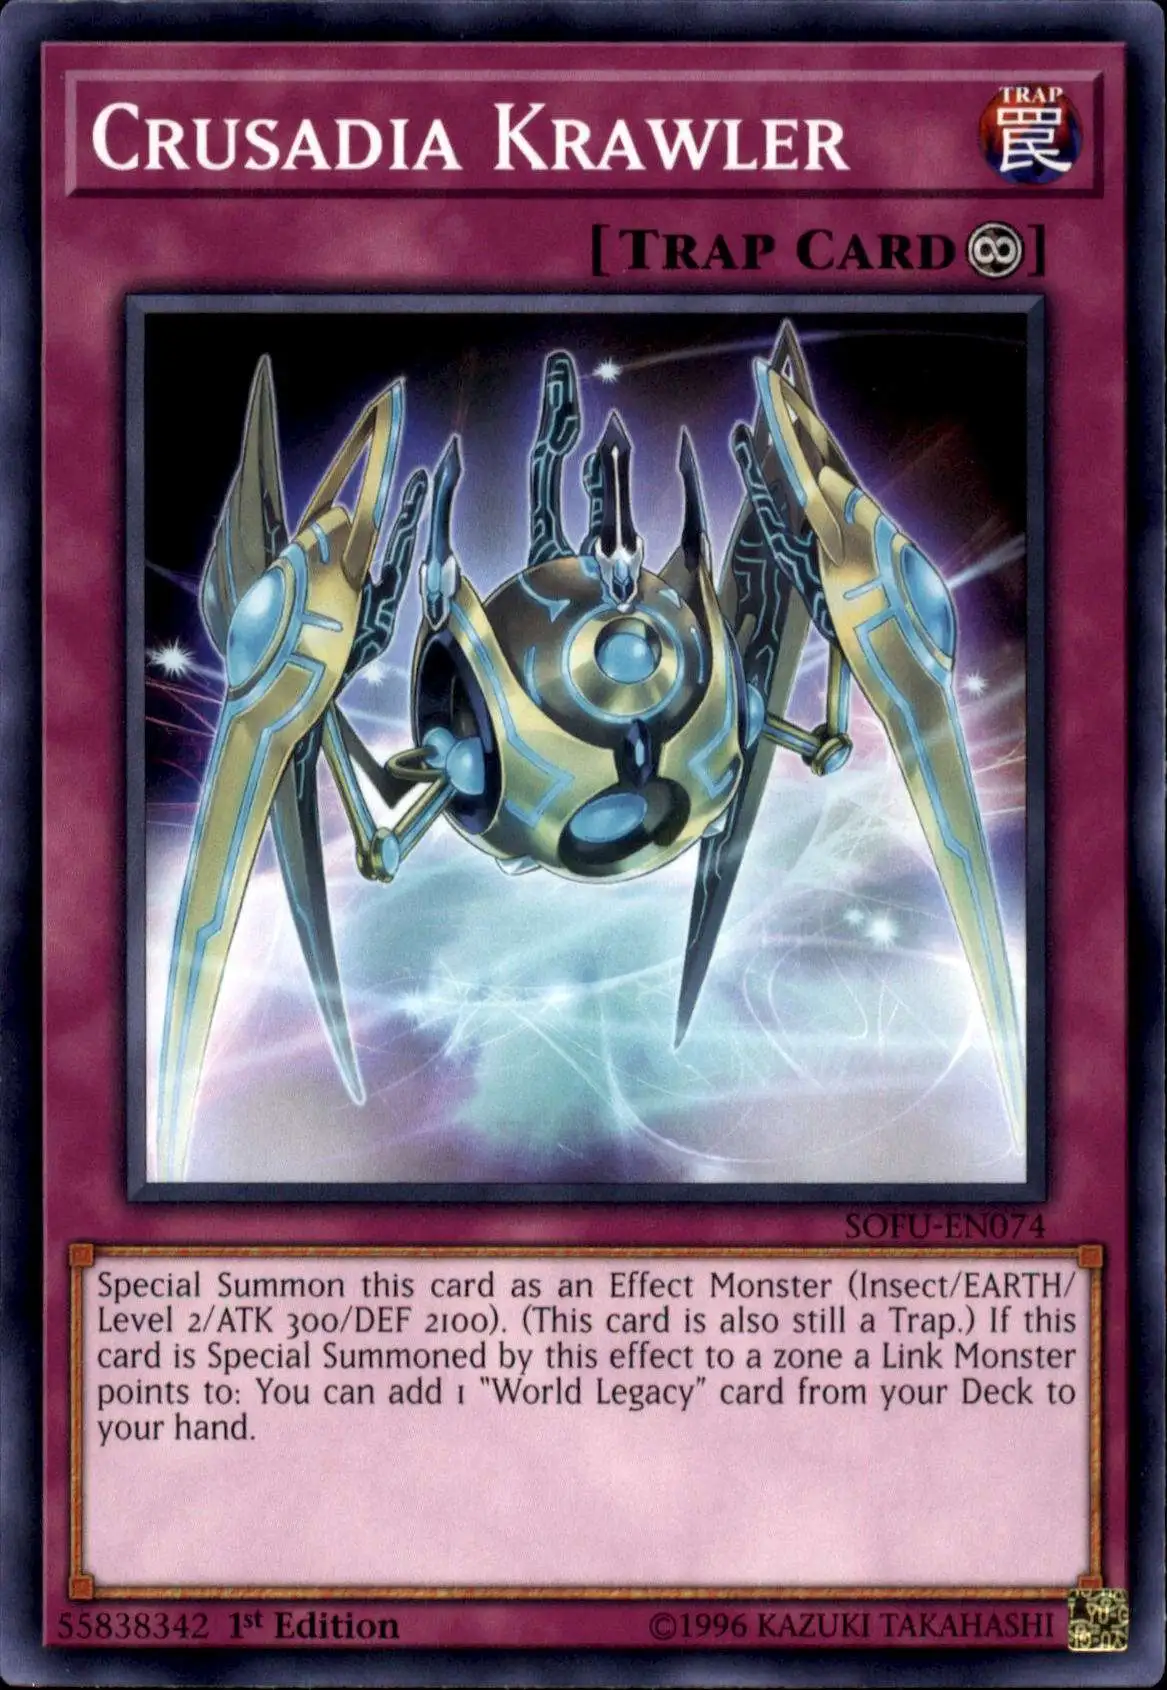 Cliff the Trap Remover MFC-078 1st Edition! Yu-Gi-Oh Card 